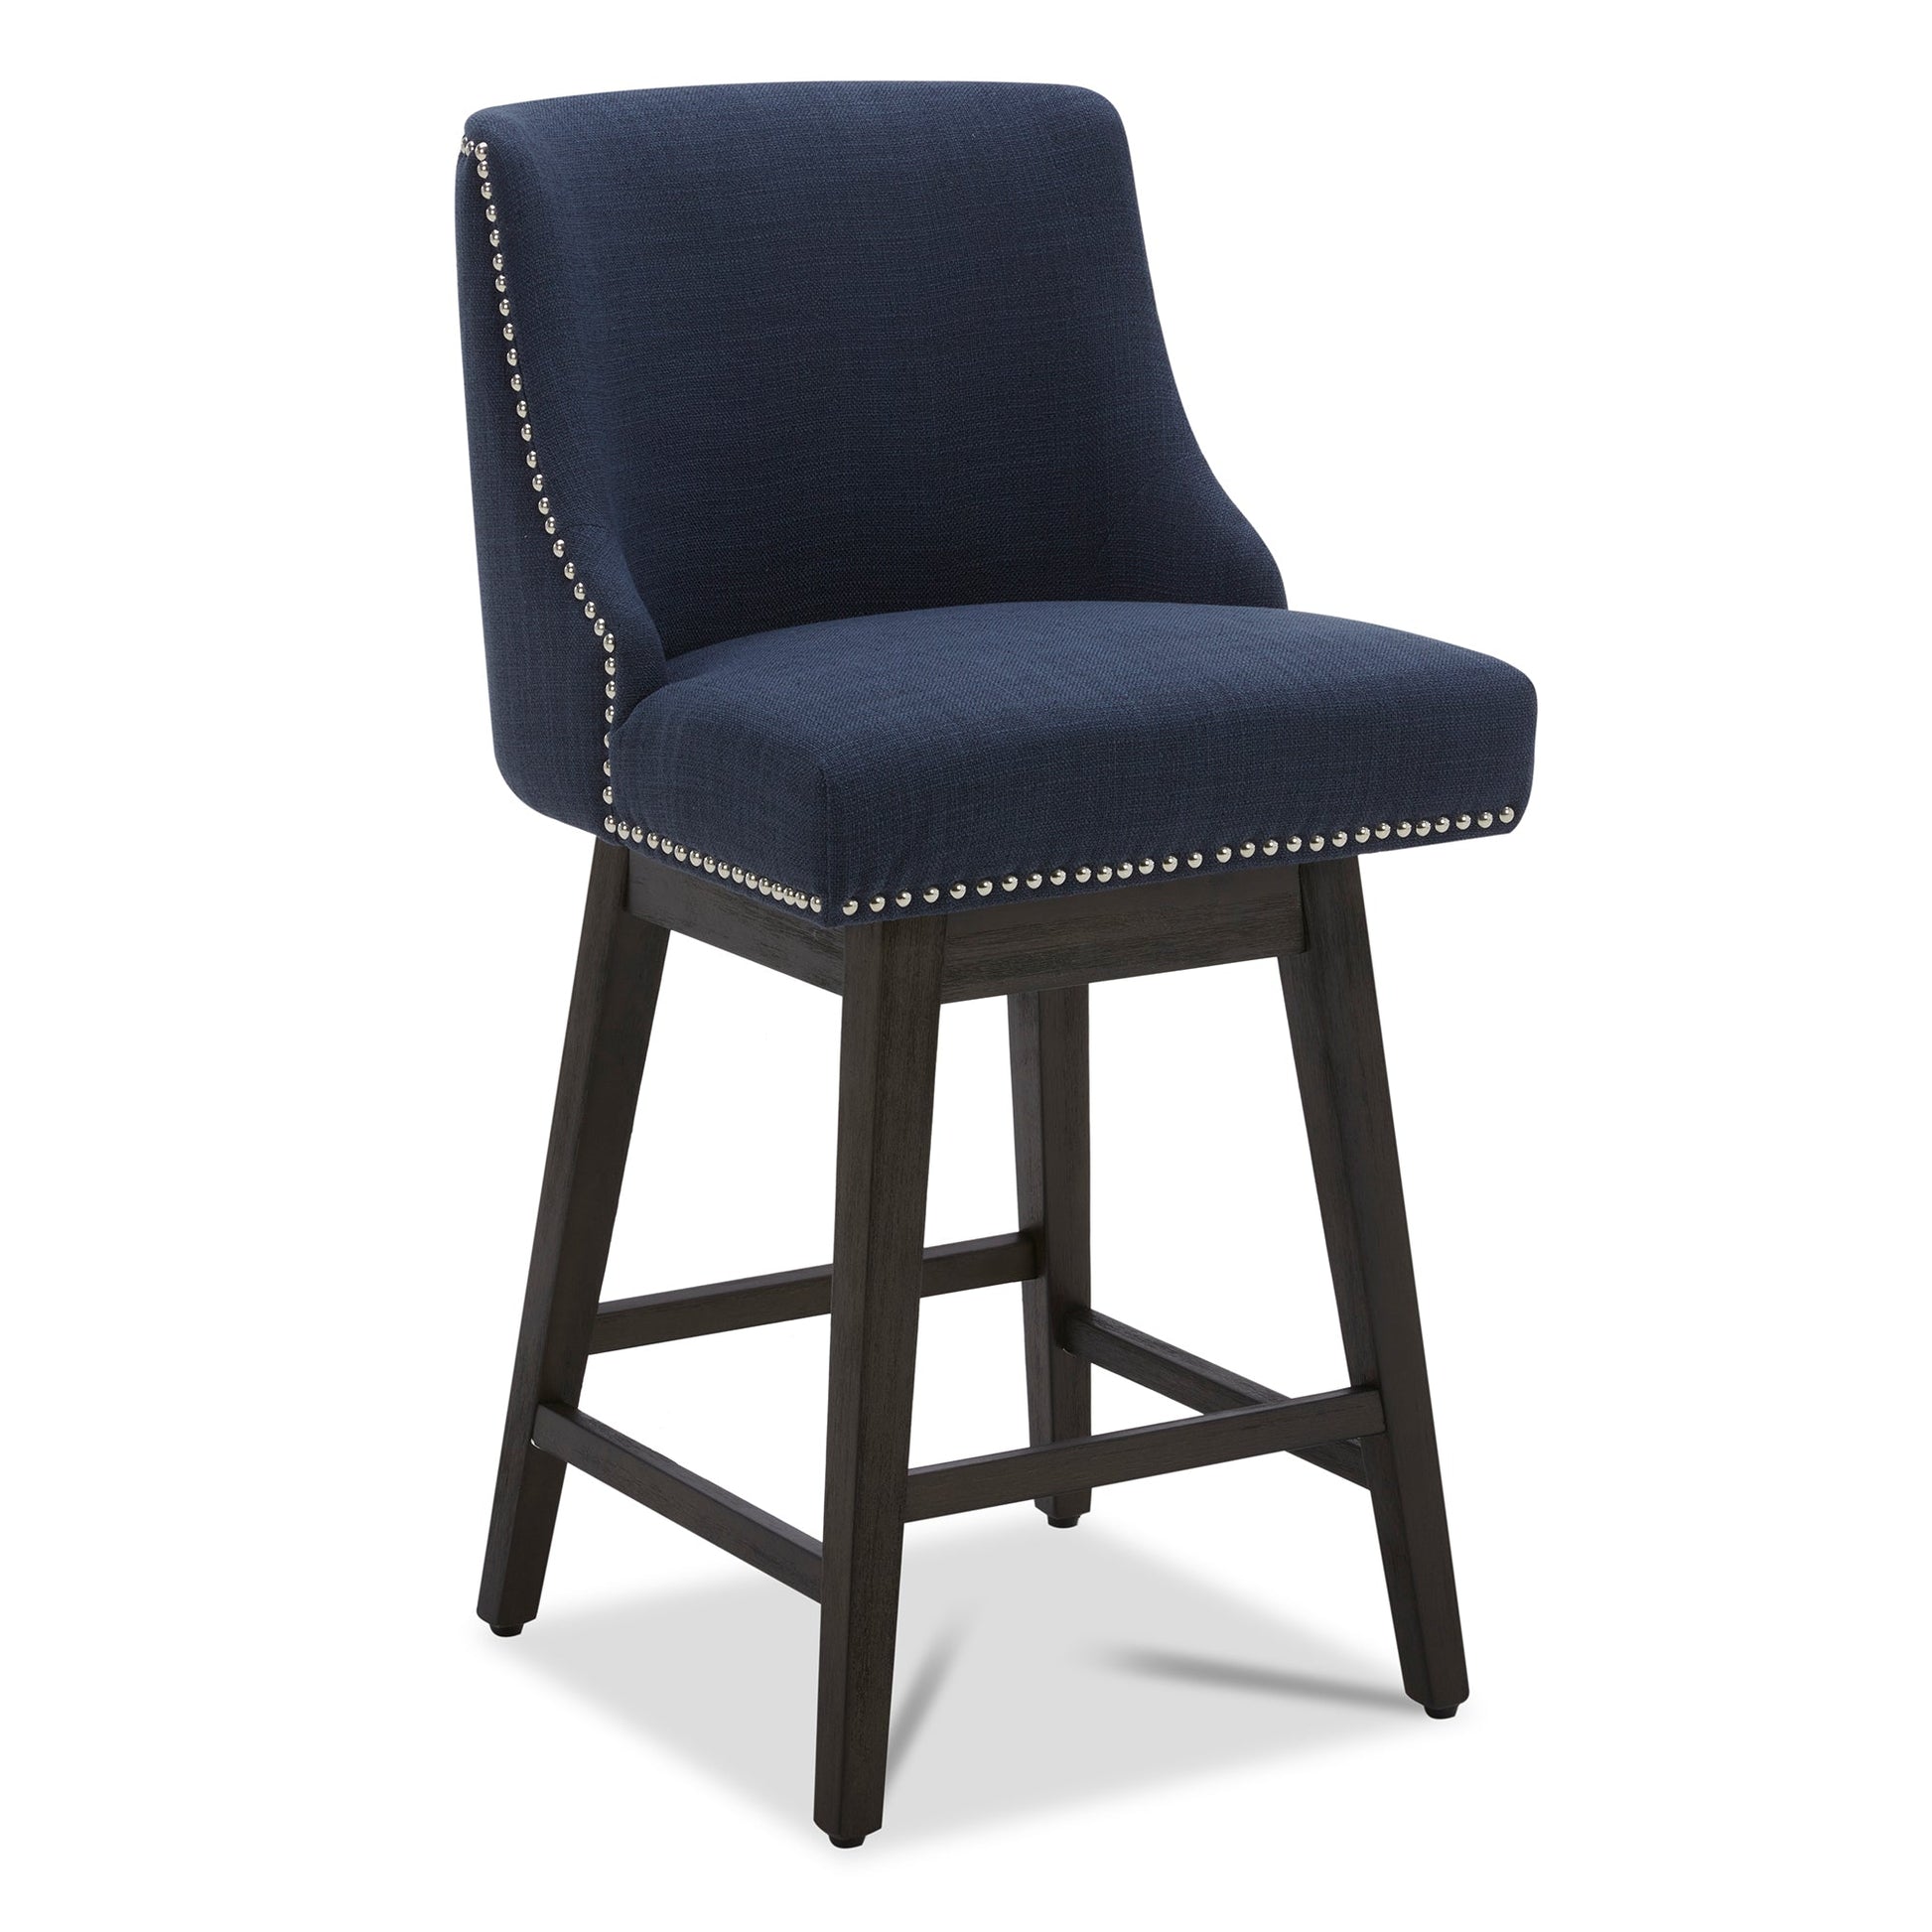 CHITA LIVING-Asher Swivel Counter Stool with Nailhead Trim-Counter Stools-Fabric-Insignia blue-